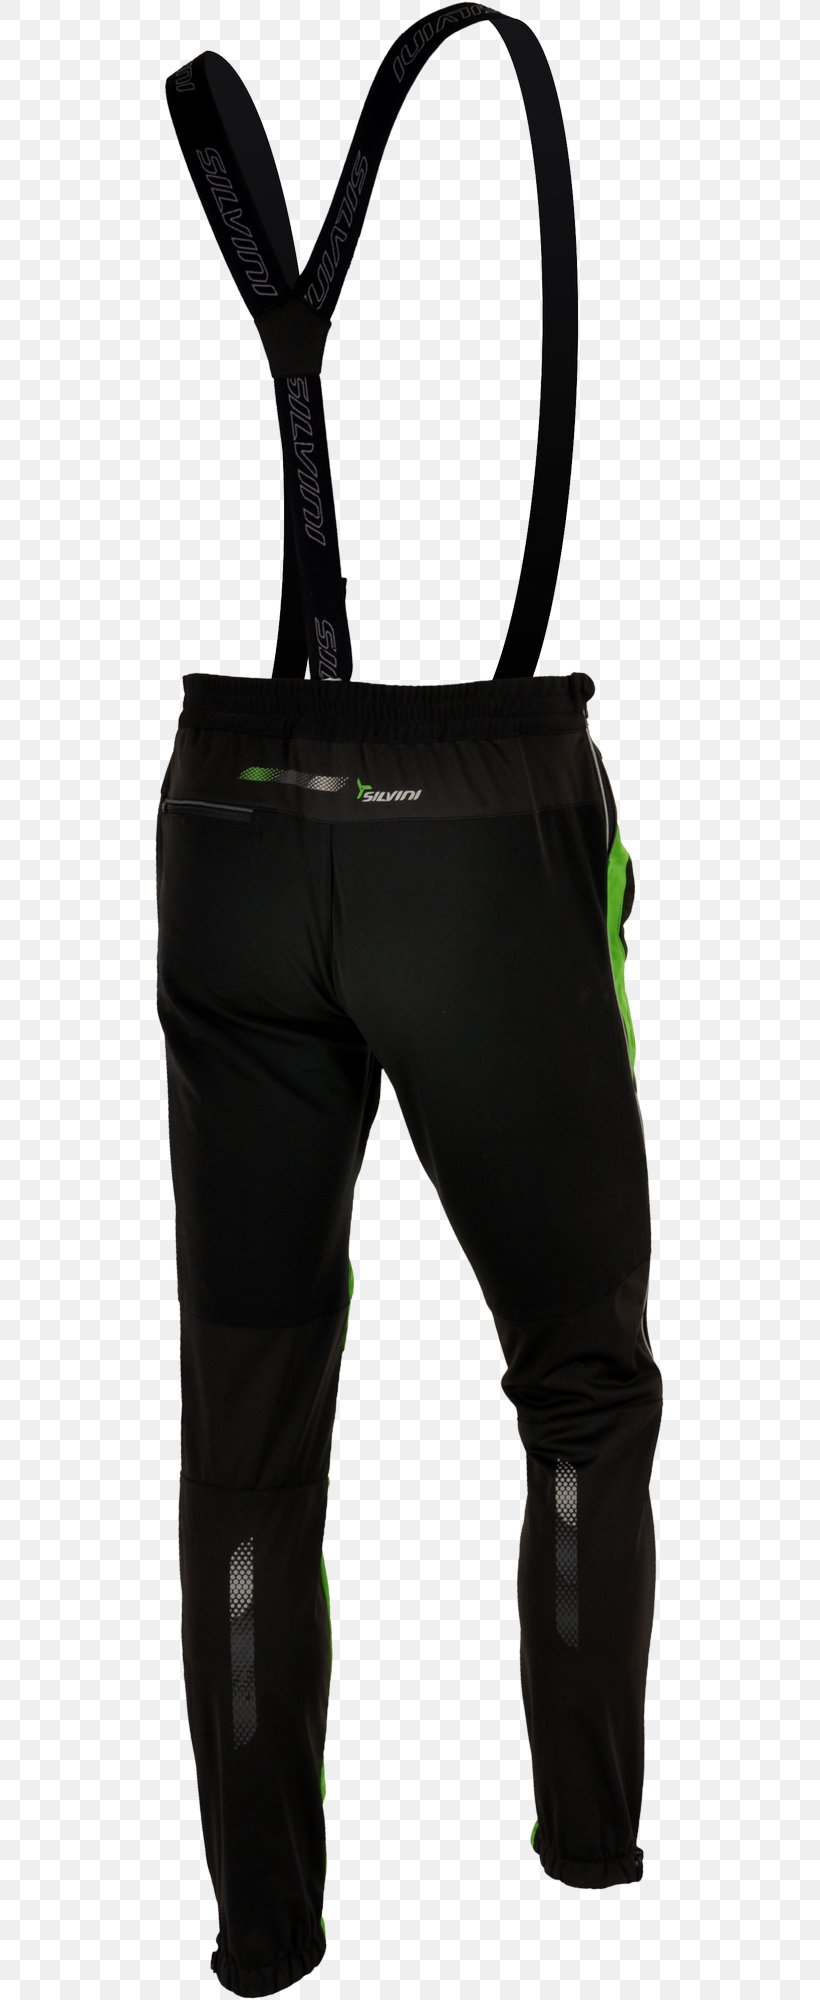 Pants SILVINI Pro Forma Sportswear Skiing, PNG, 511x2000px, Pants, Black, Blue, Crosscountry Skiing, Dry Suit Download Free